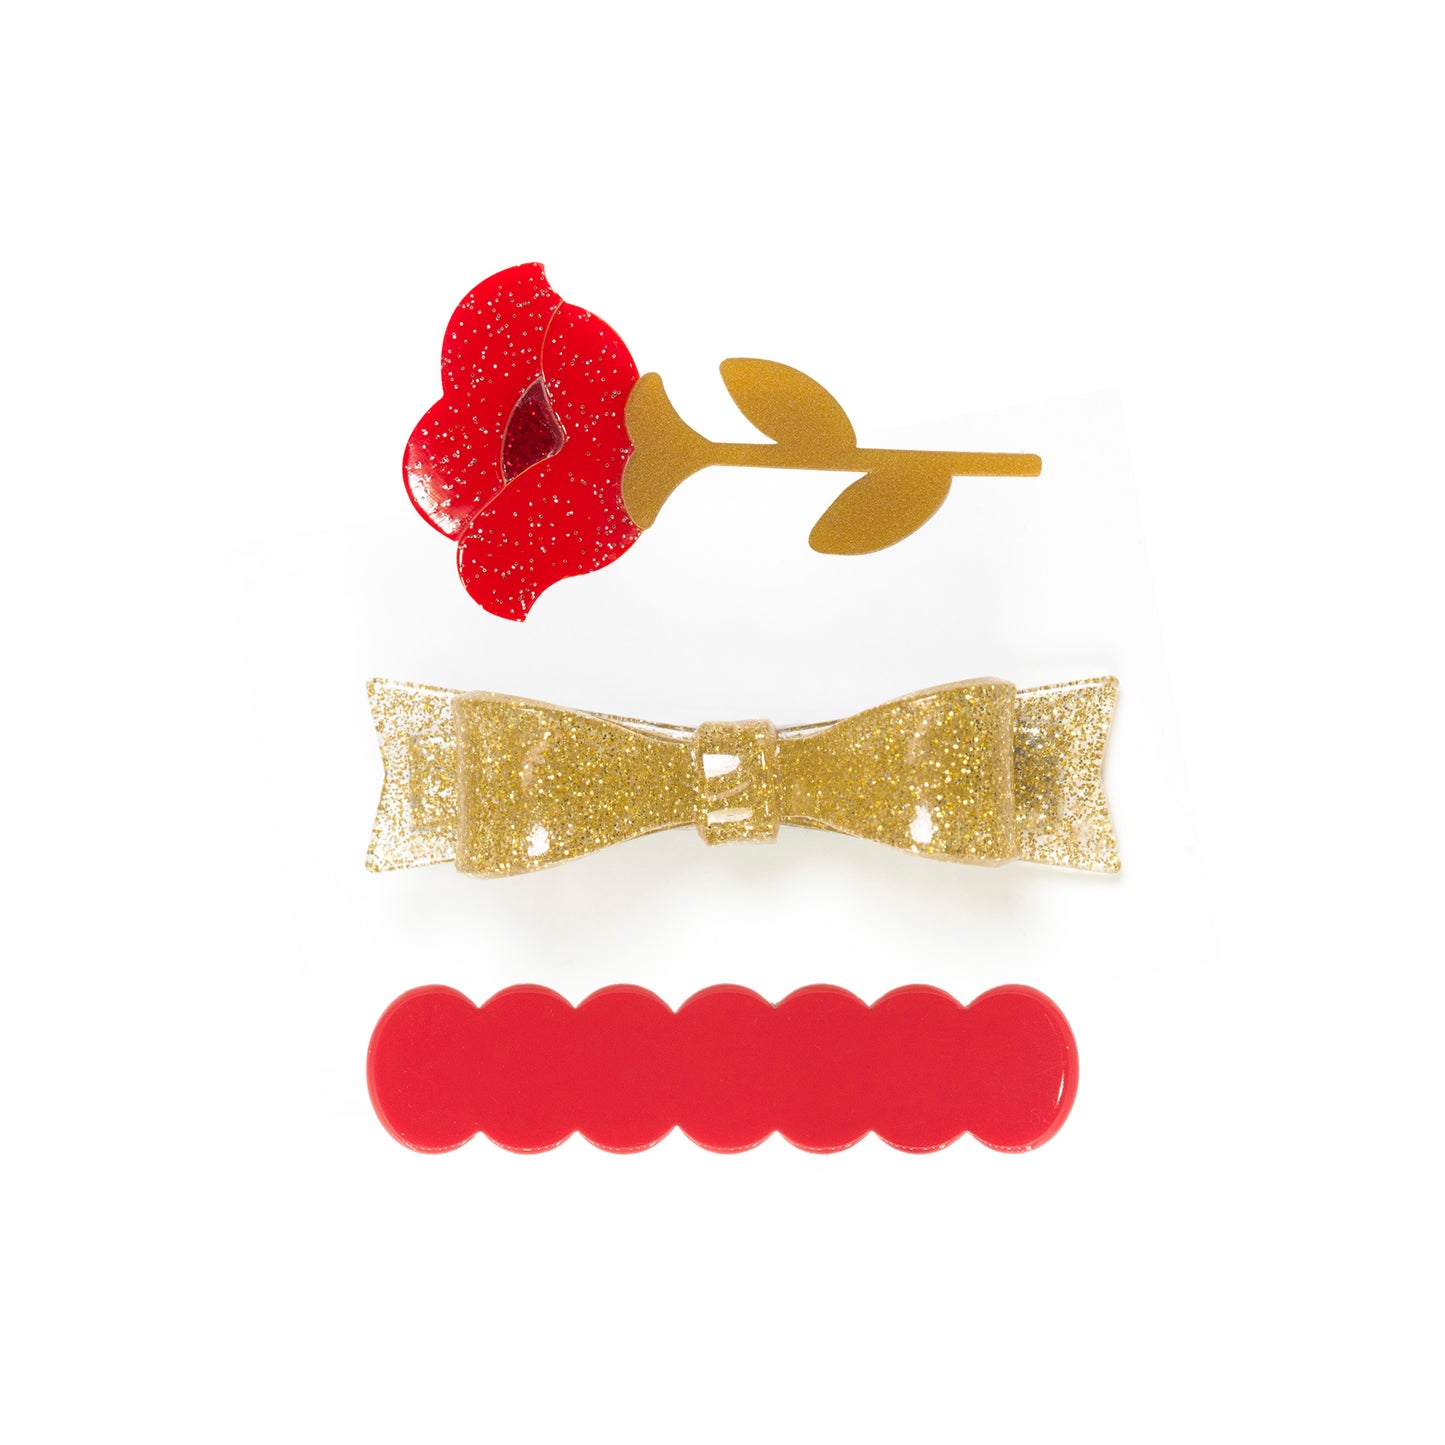 Trio of hair clips. One of them is adorned with a red rose, the second one is a gold glitter bow, and the third one is a simple red cutout. 